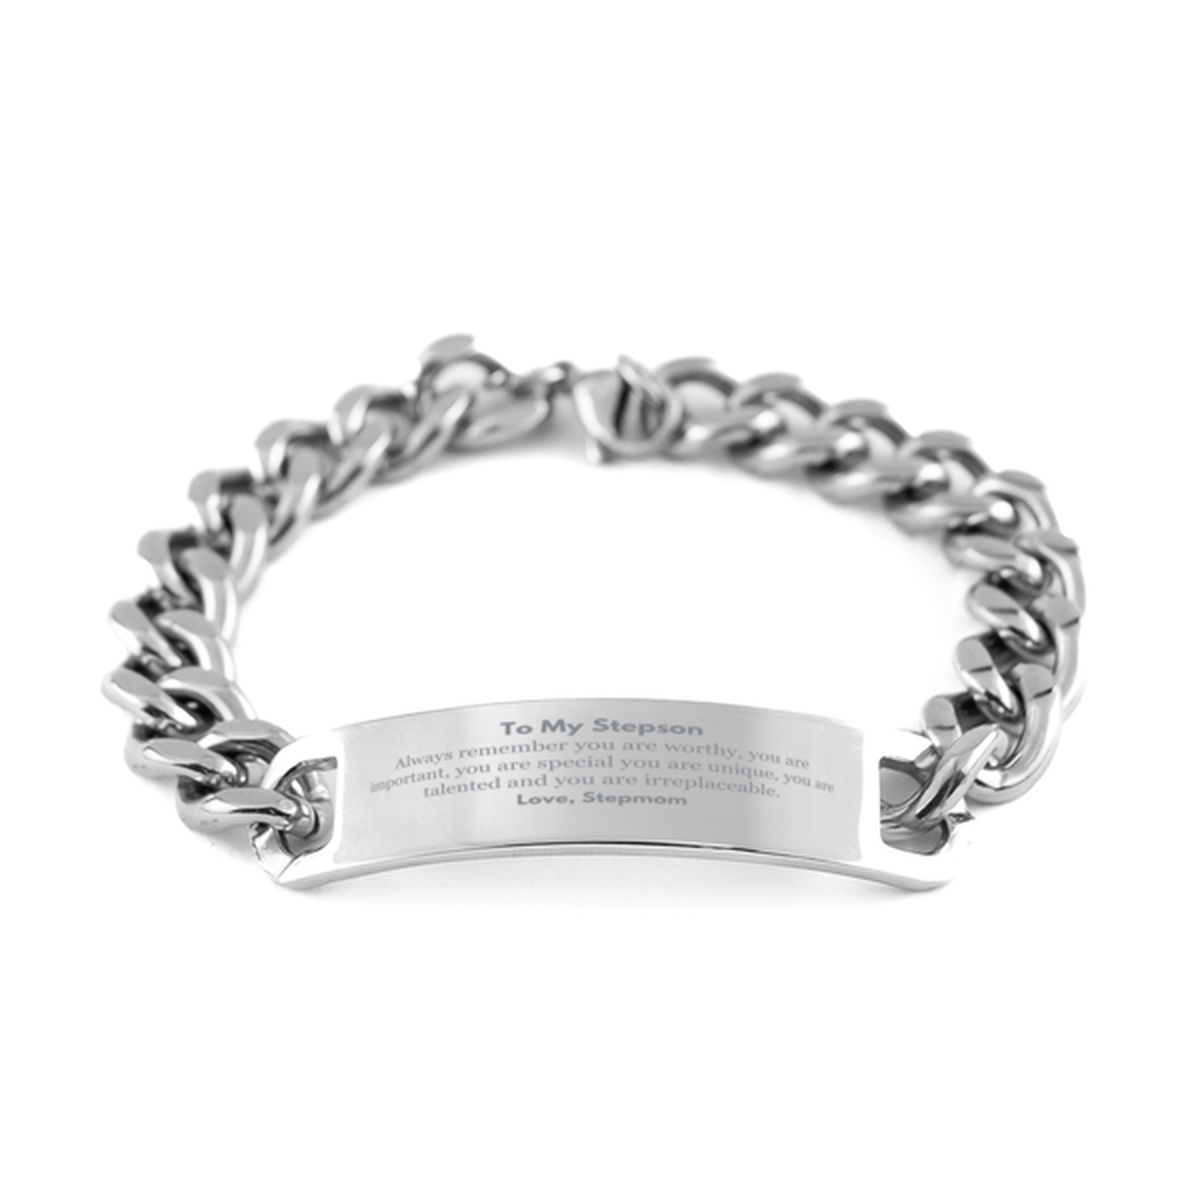 Stepson Birthday Gifts from Stepmom, Inspirational Cuban Chain Stainless Steel Bracelet for Stepson Christmas Graduation Gifts for Stepson Always remember you are worthy, you are important. Love, Stepmom